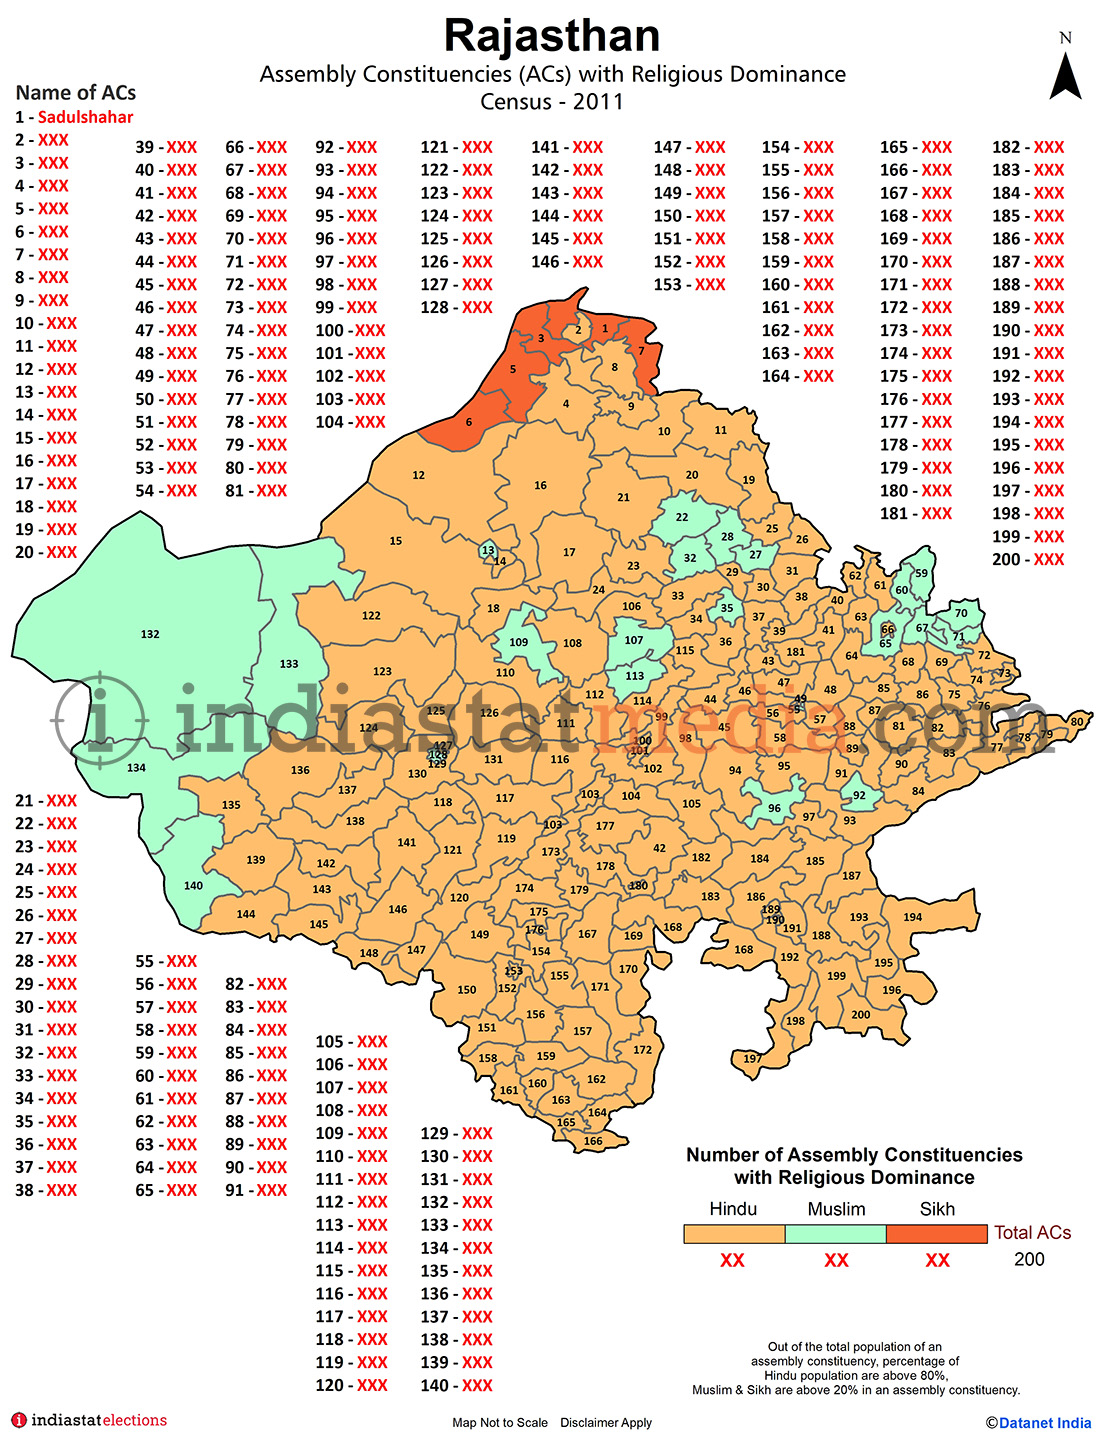 Assembly Constituencies (ACs) with Religious Dominance in Rajasthan- Census 2011